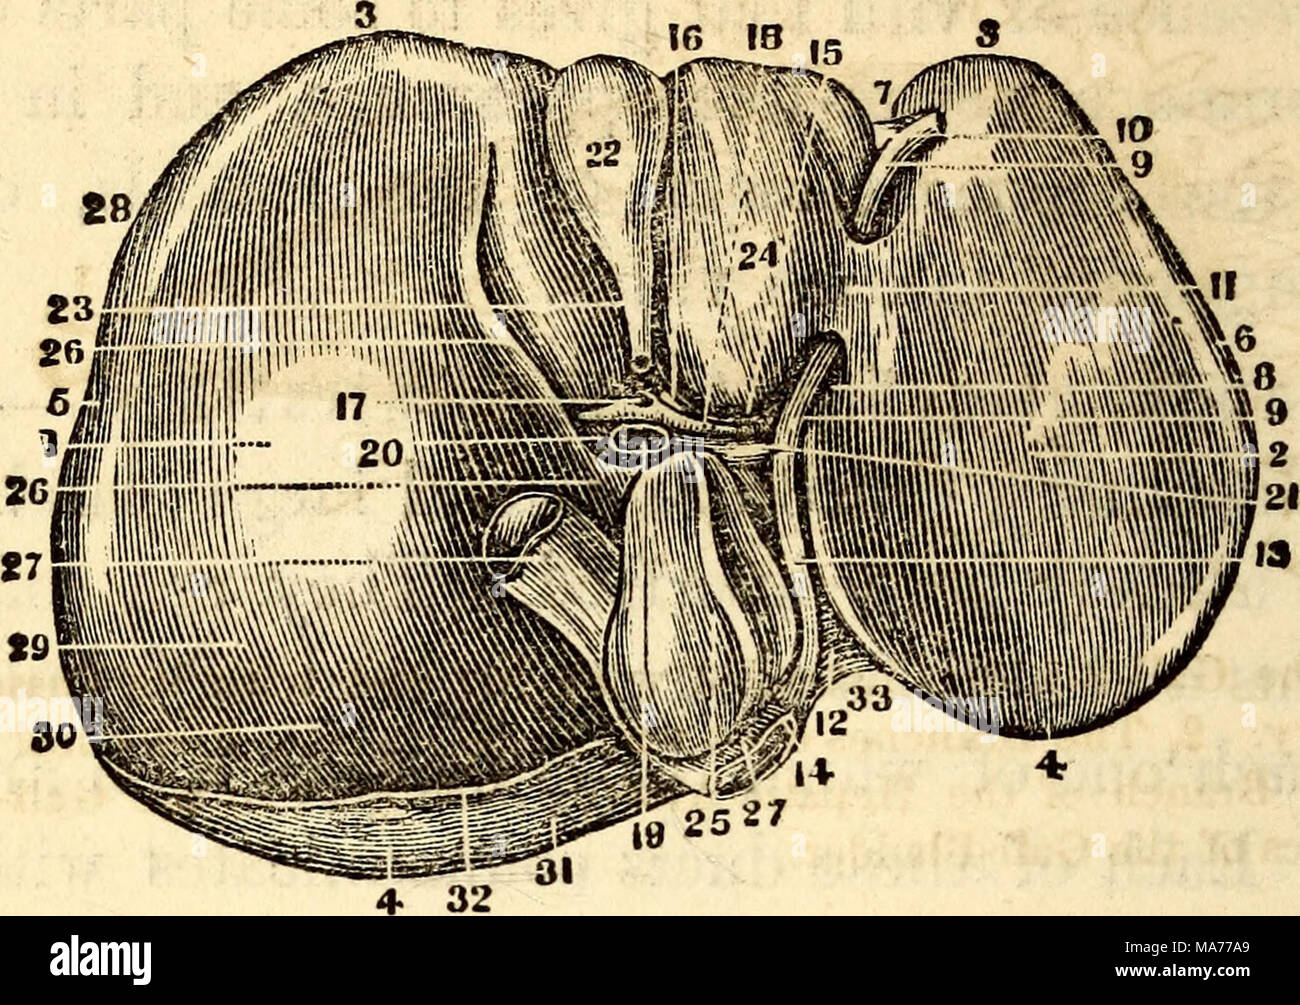 . Elementary anatomy and physiology : for colleges, academies, and other schools . The Inferior or Concave Surface of the Liver, showing its Subdivisions into Lobes. I, Center of the Light Lobe. 2, Center of the Left Lobe. 3, Its Anterior, Inferior, or Thin Margin. 4, Its Posterior, Thick or Diaphragmatic Portion. 5, The Light Extrem- ity. 6, The Left Extremity. 7, The Notch on the Anterior Margin. 8, The Umbilical or Longitudinal Fissure. 9, The Hound Ligament or remains of the Umbilical Vein. 10, The Portion of the Suspensory Ligament in connection with the Round Ligament. II, Pons Ilepatis, Stock Photo